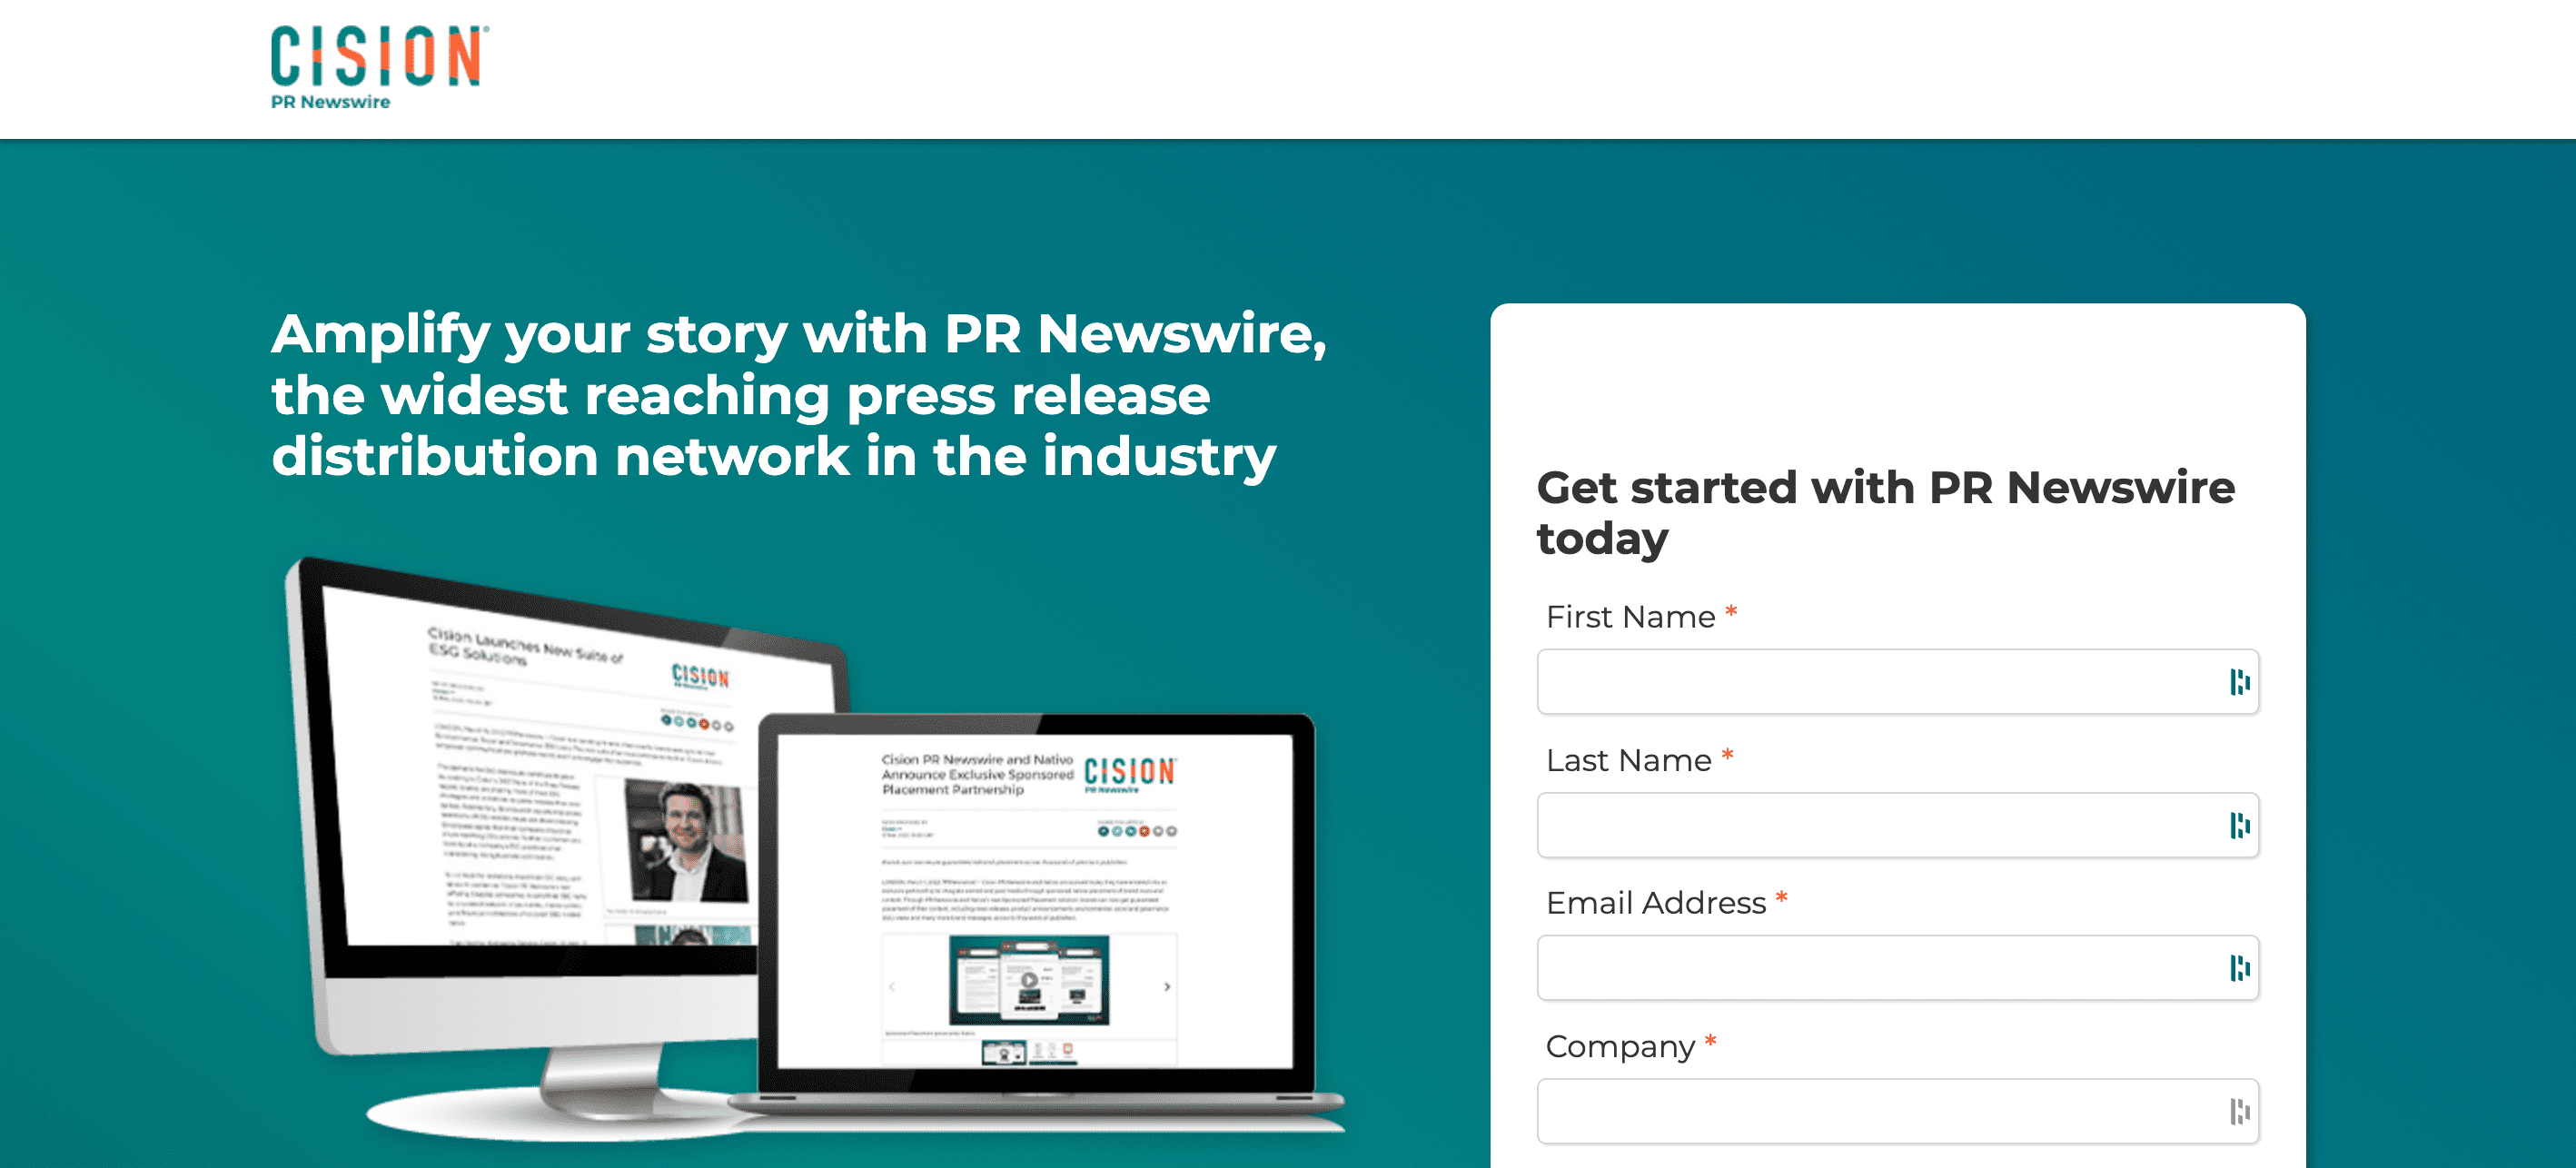 A screenshot of Cision's PR Newswire home page.